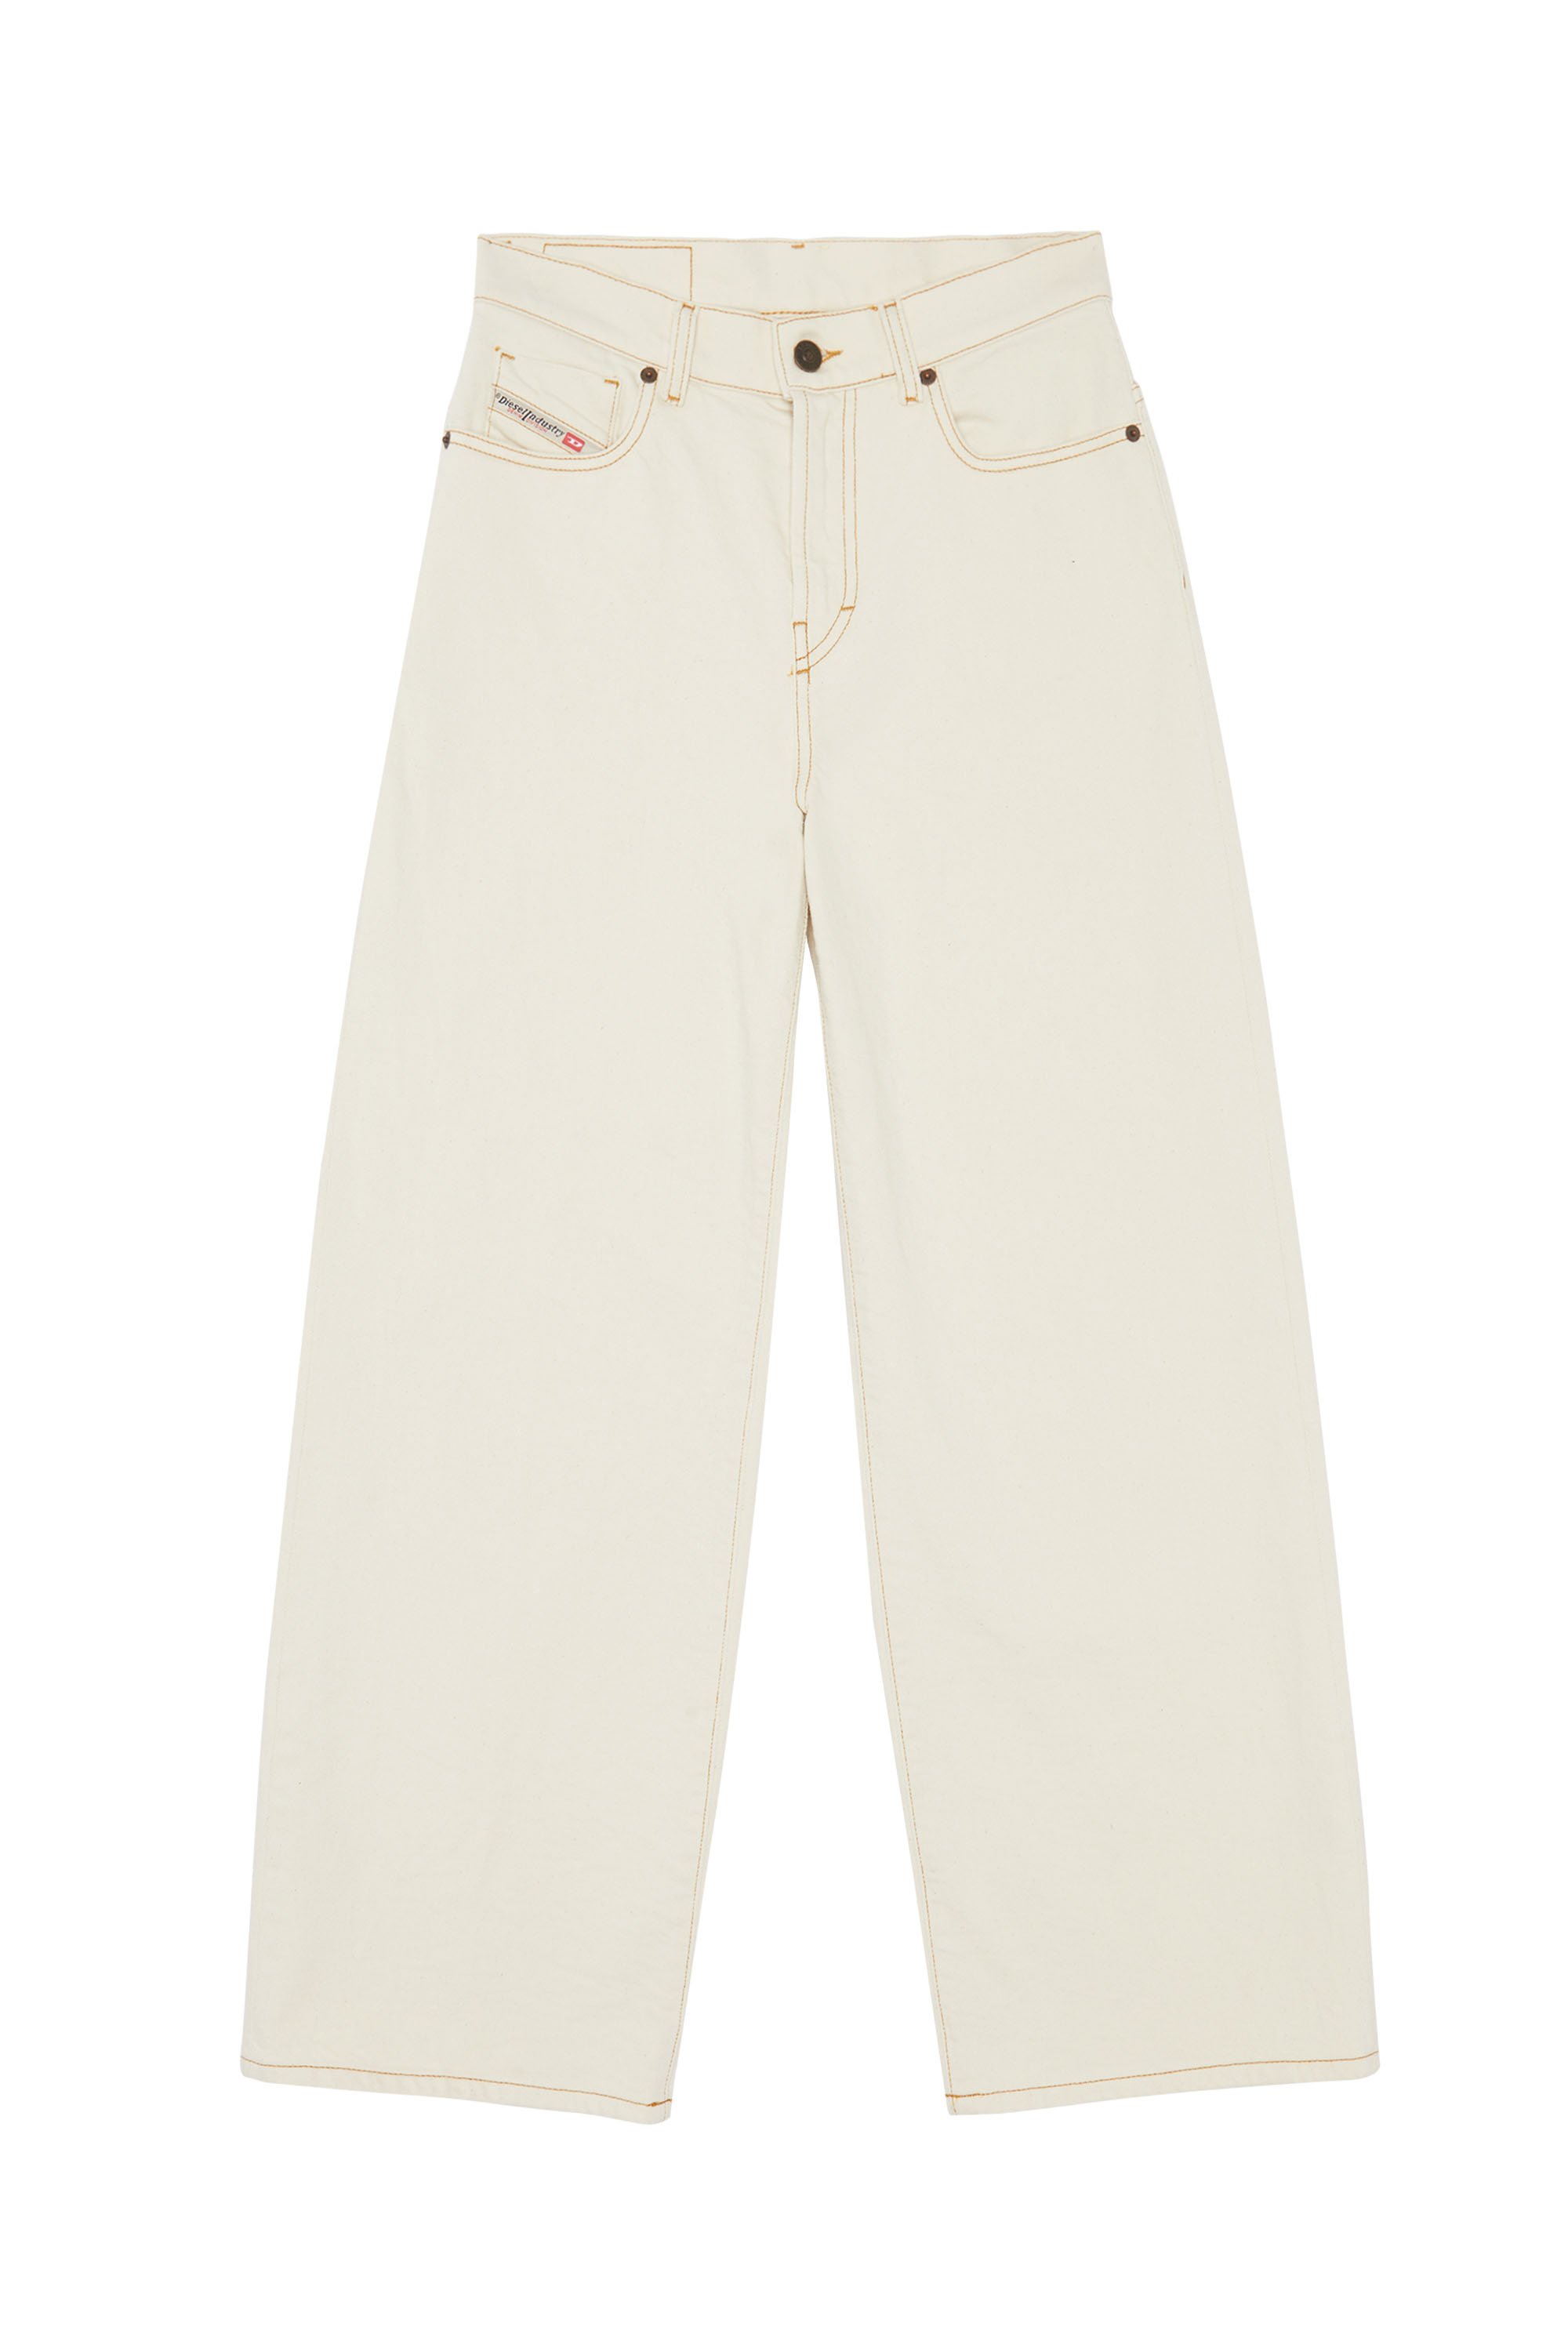 2000 WIDEE 09B94 Bootcut and Flare Jeans, White - Jeans